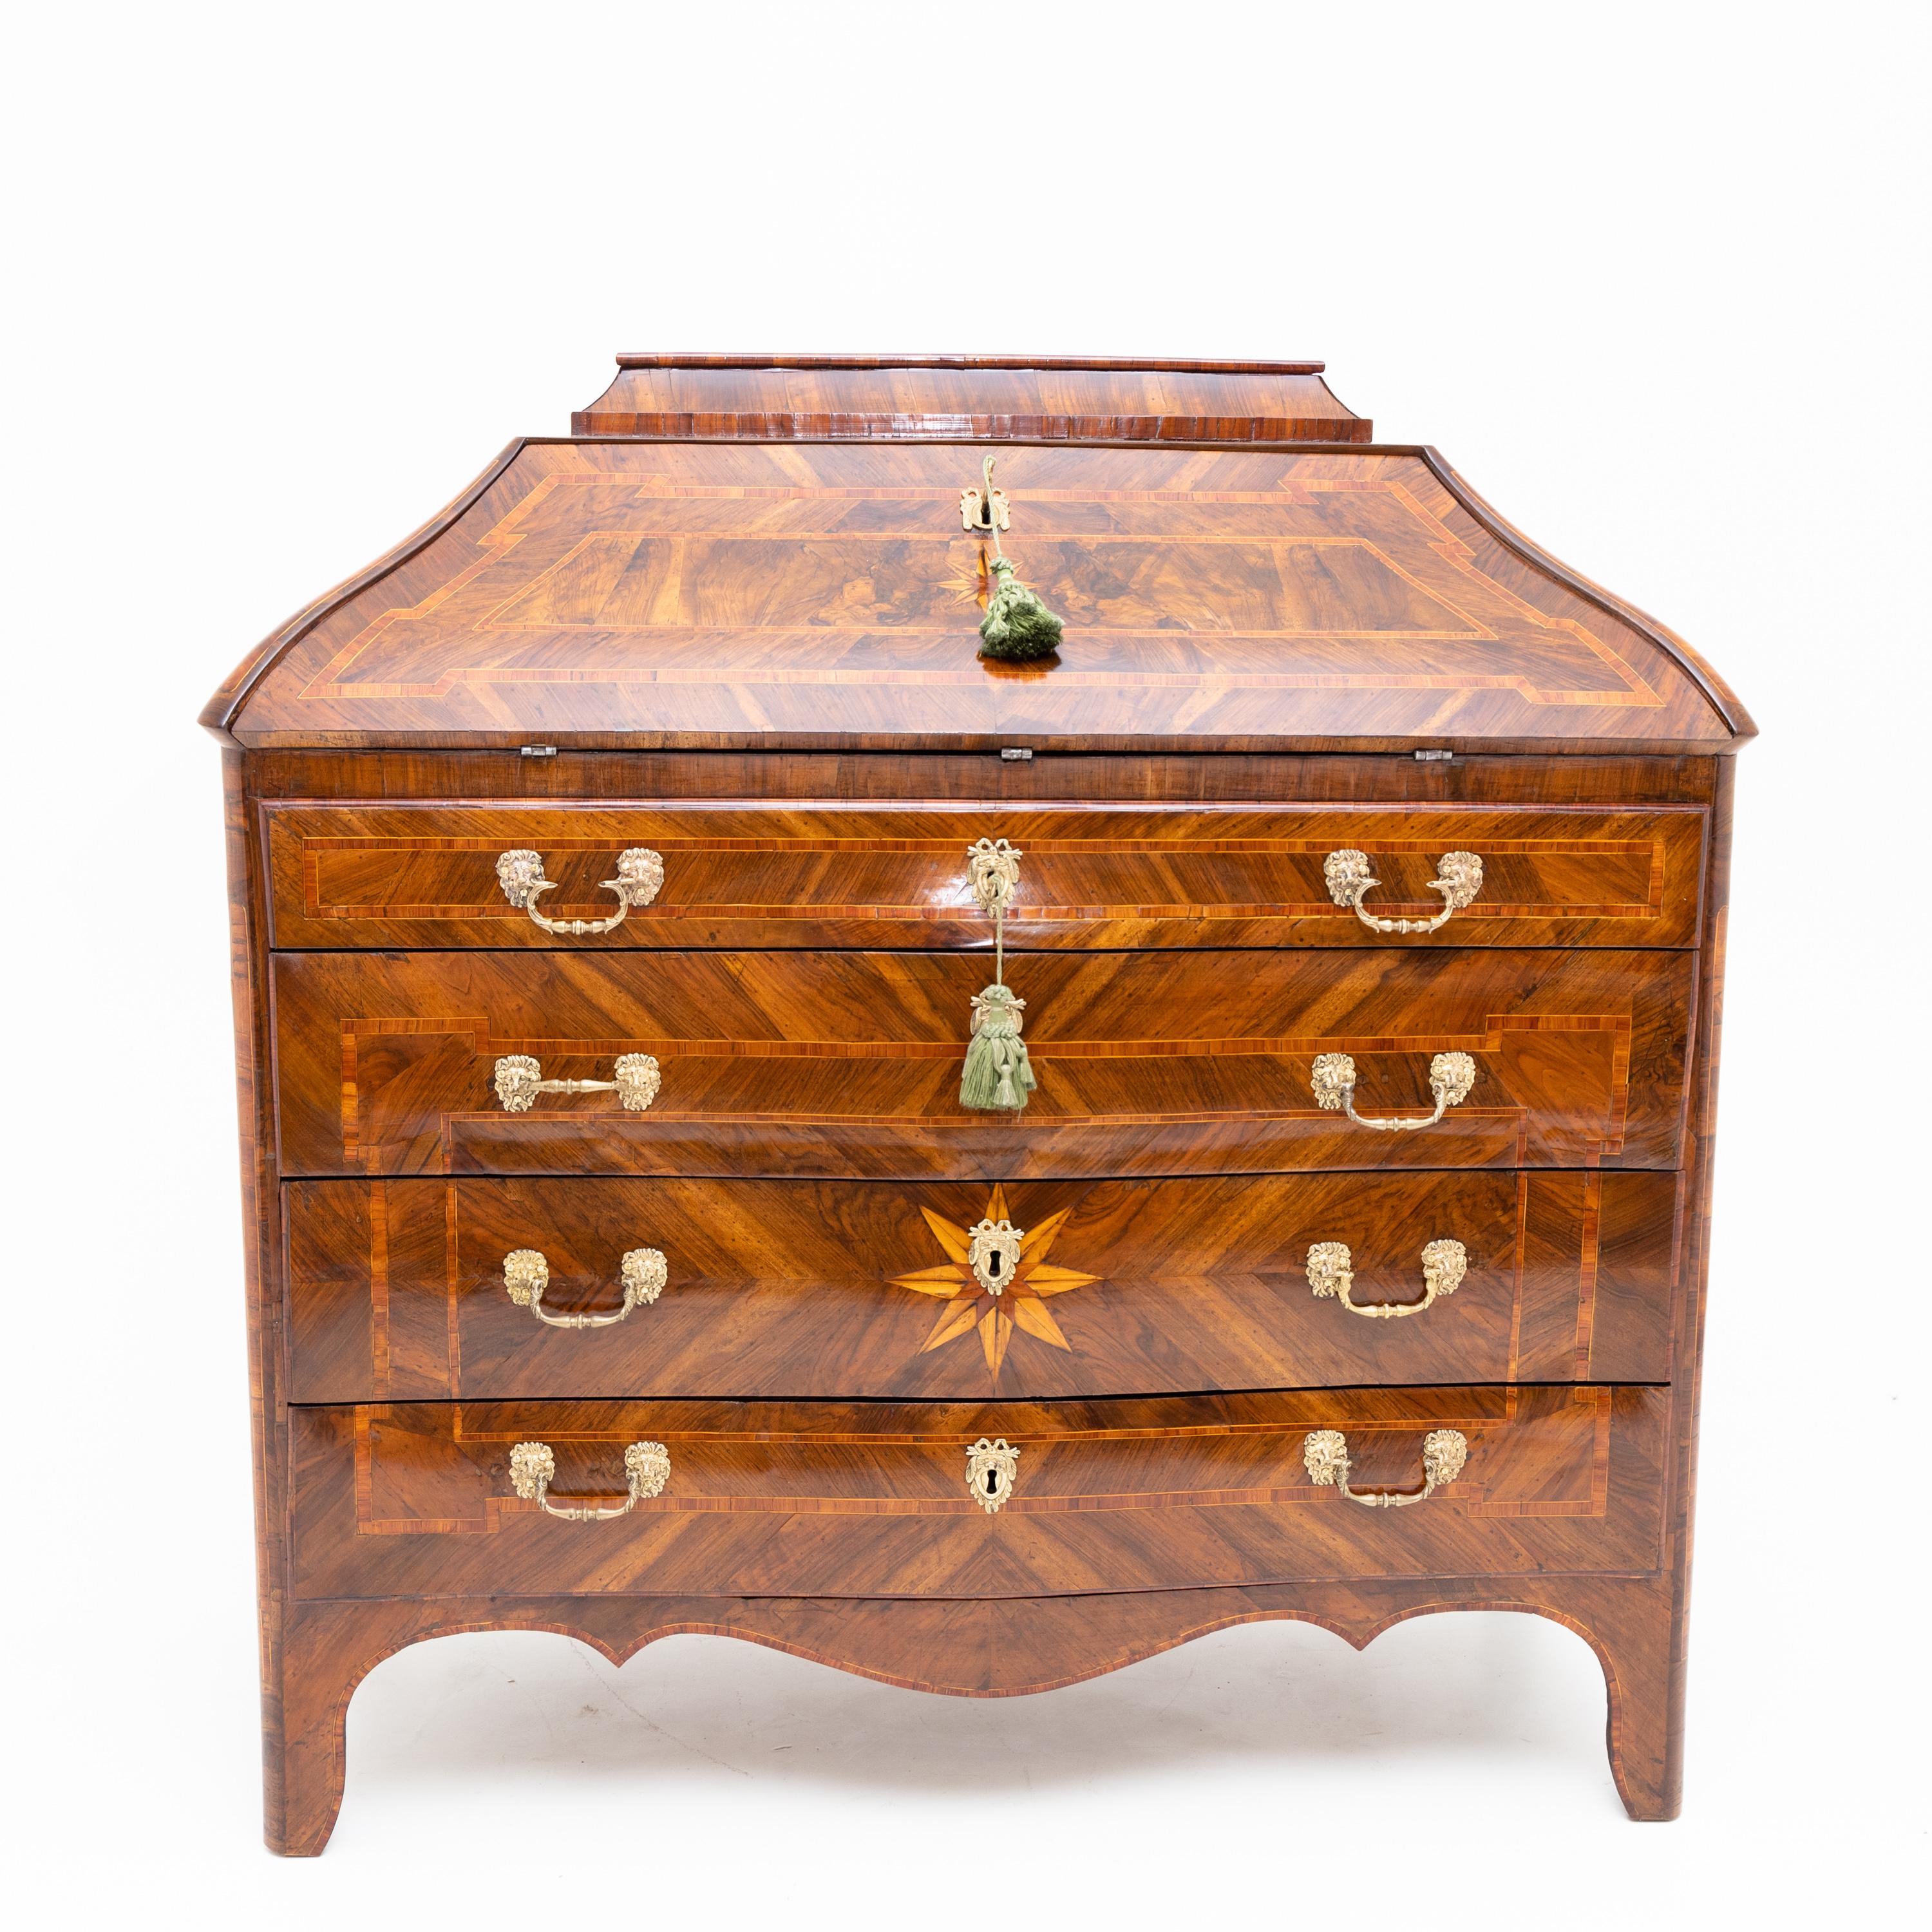 Italian secretaire standing on bracket feet with four drawers and trapezoidal top with an inclined flap. The walnut veneer is contrasted with panel-shaped frames and decorated with a large star-shaped inlay on the front. Behind the writing flap